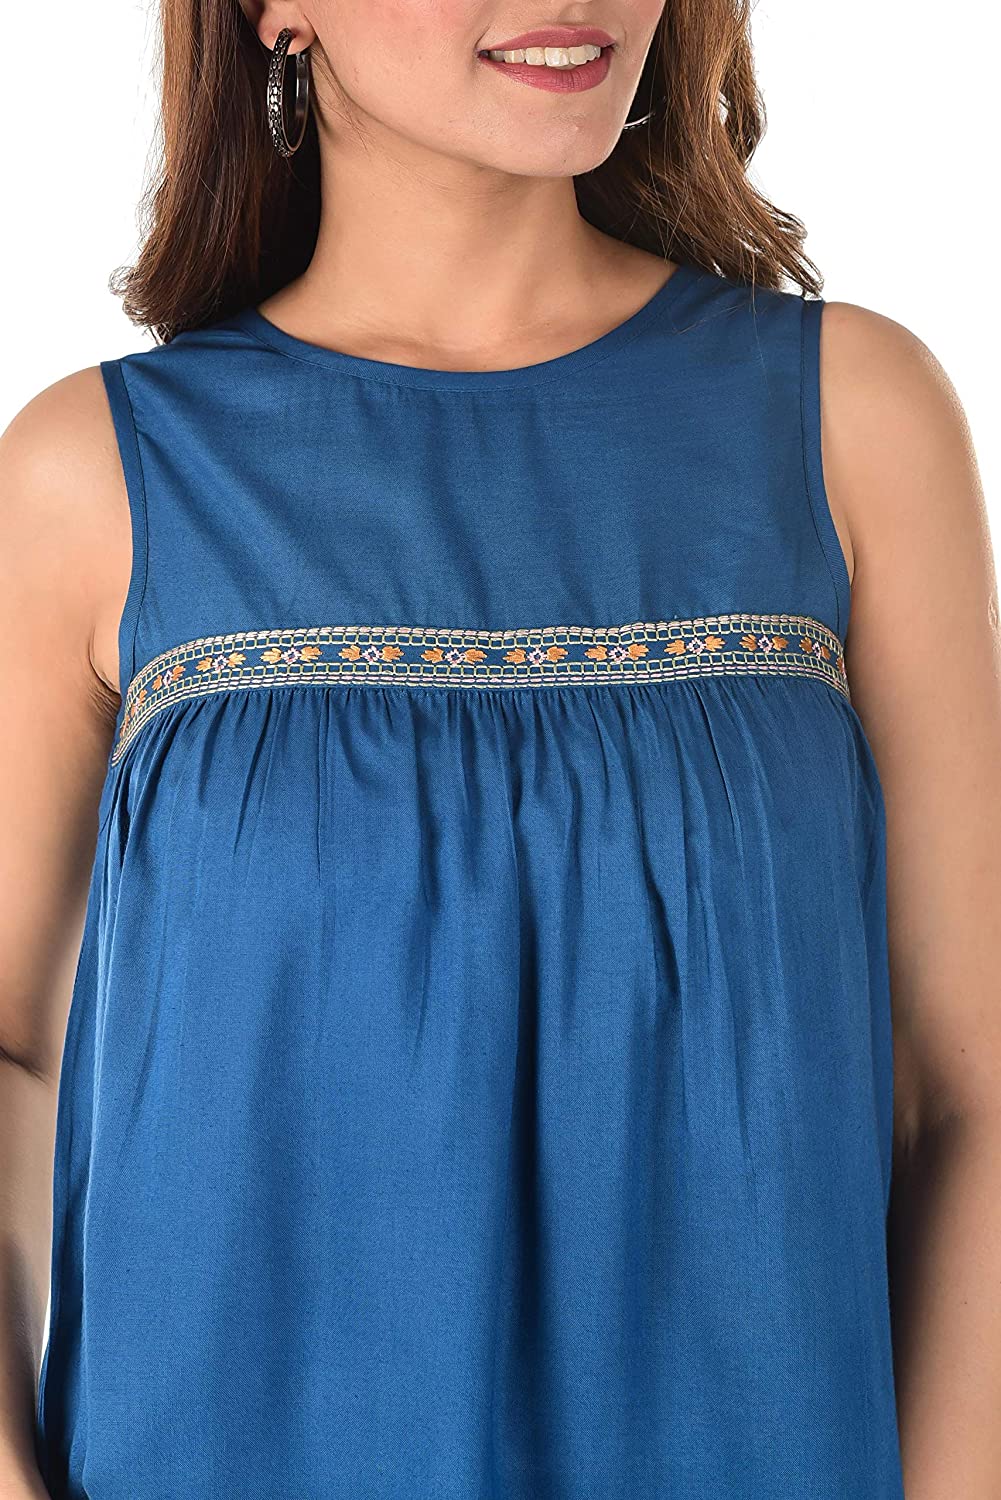 Teal Blue Embroidered Top